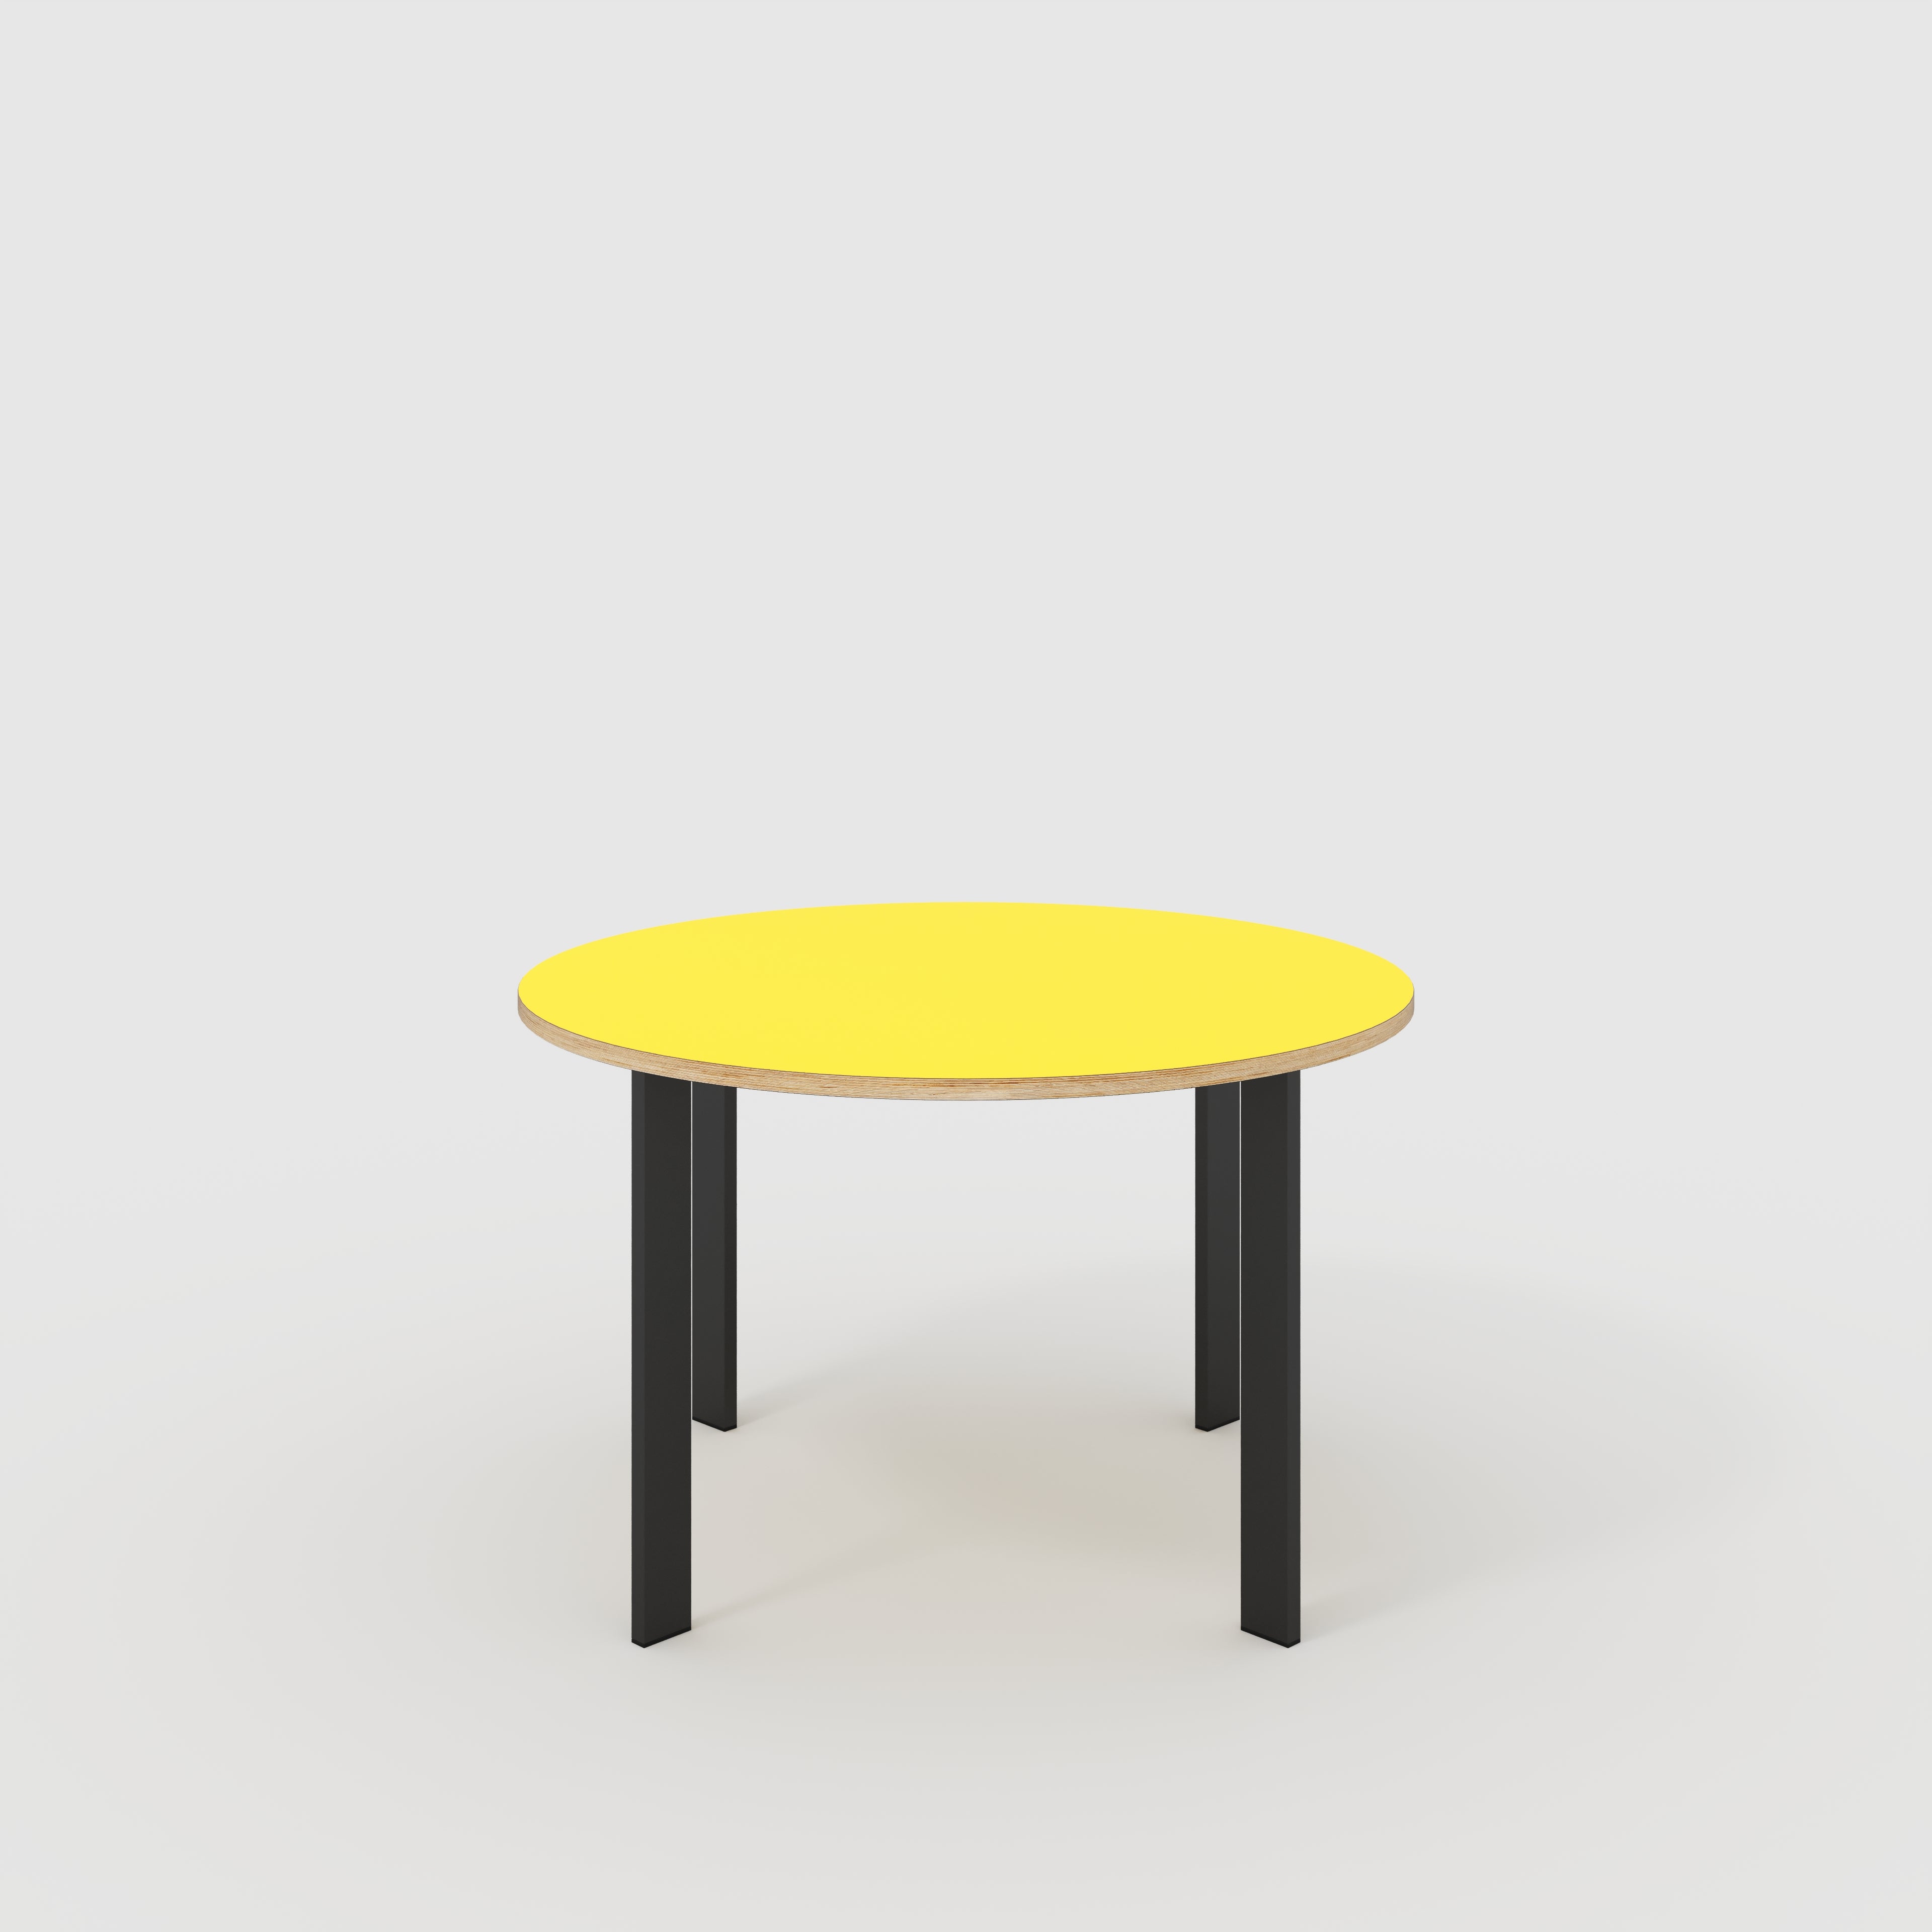 Round Table with Black Rectangular Single Pin Legs - Formica Chrome Yellow - 1200(dia) x 750(h)